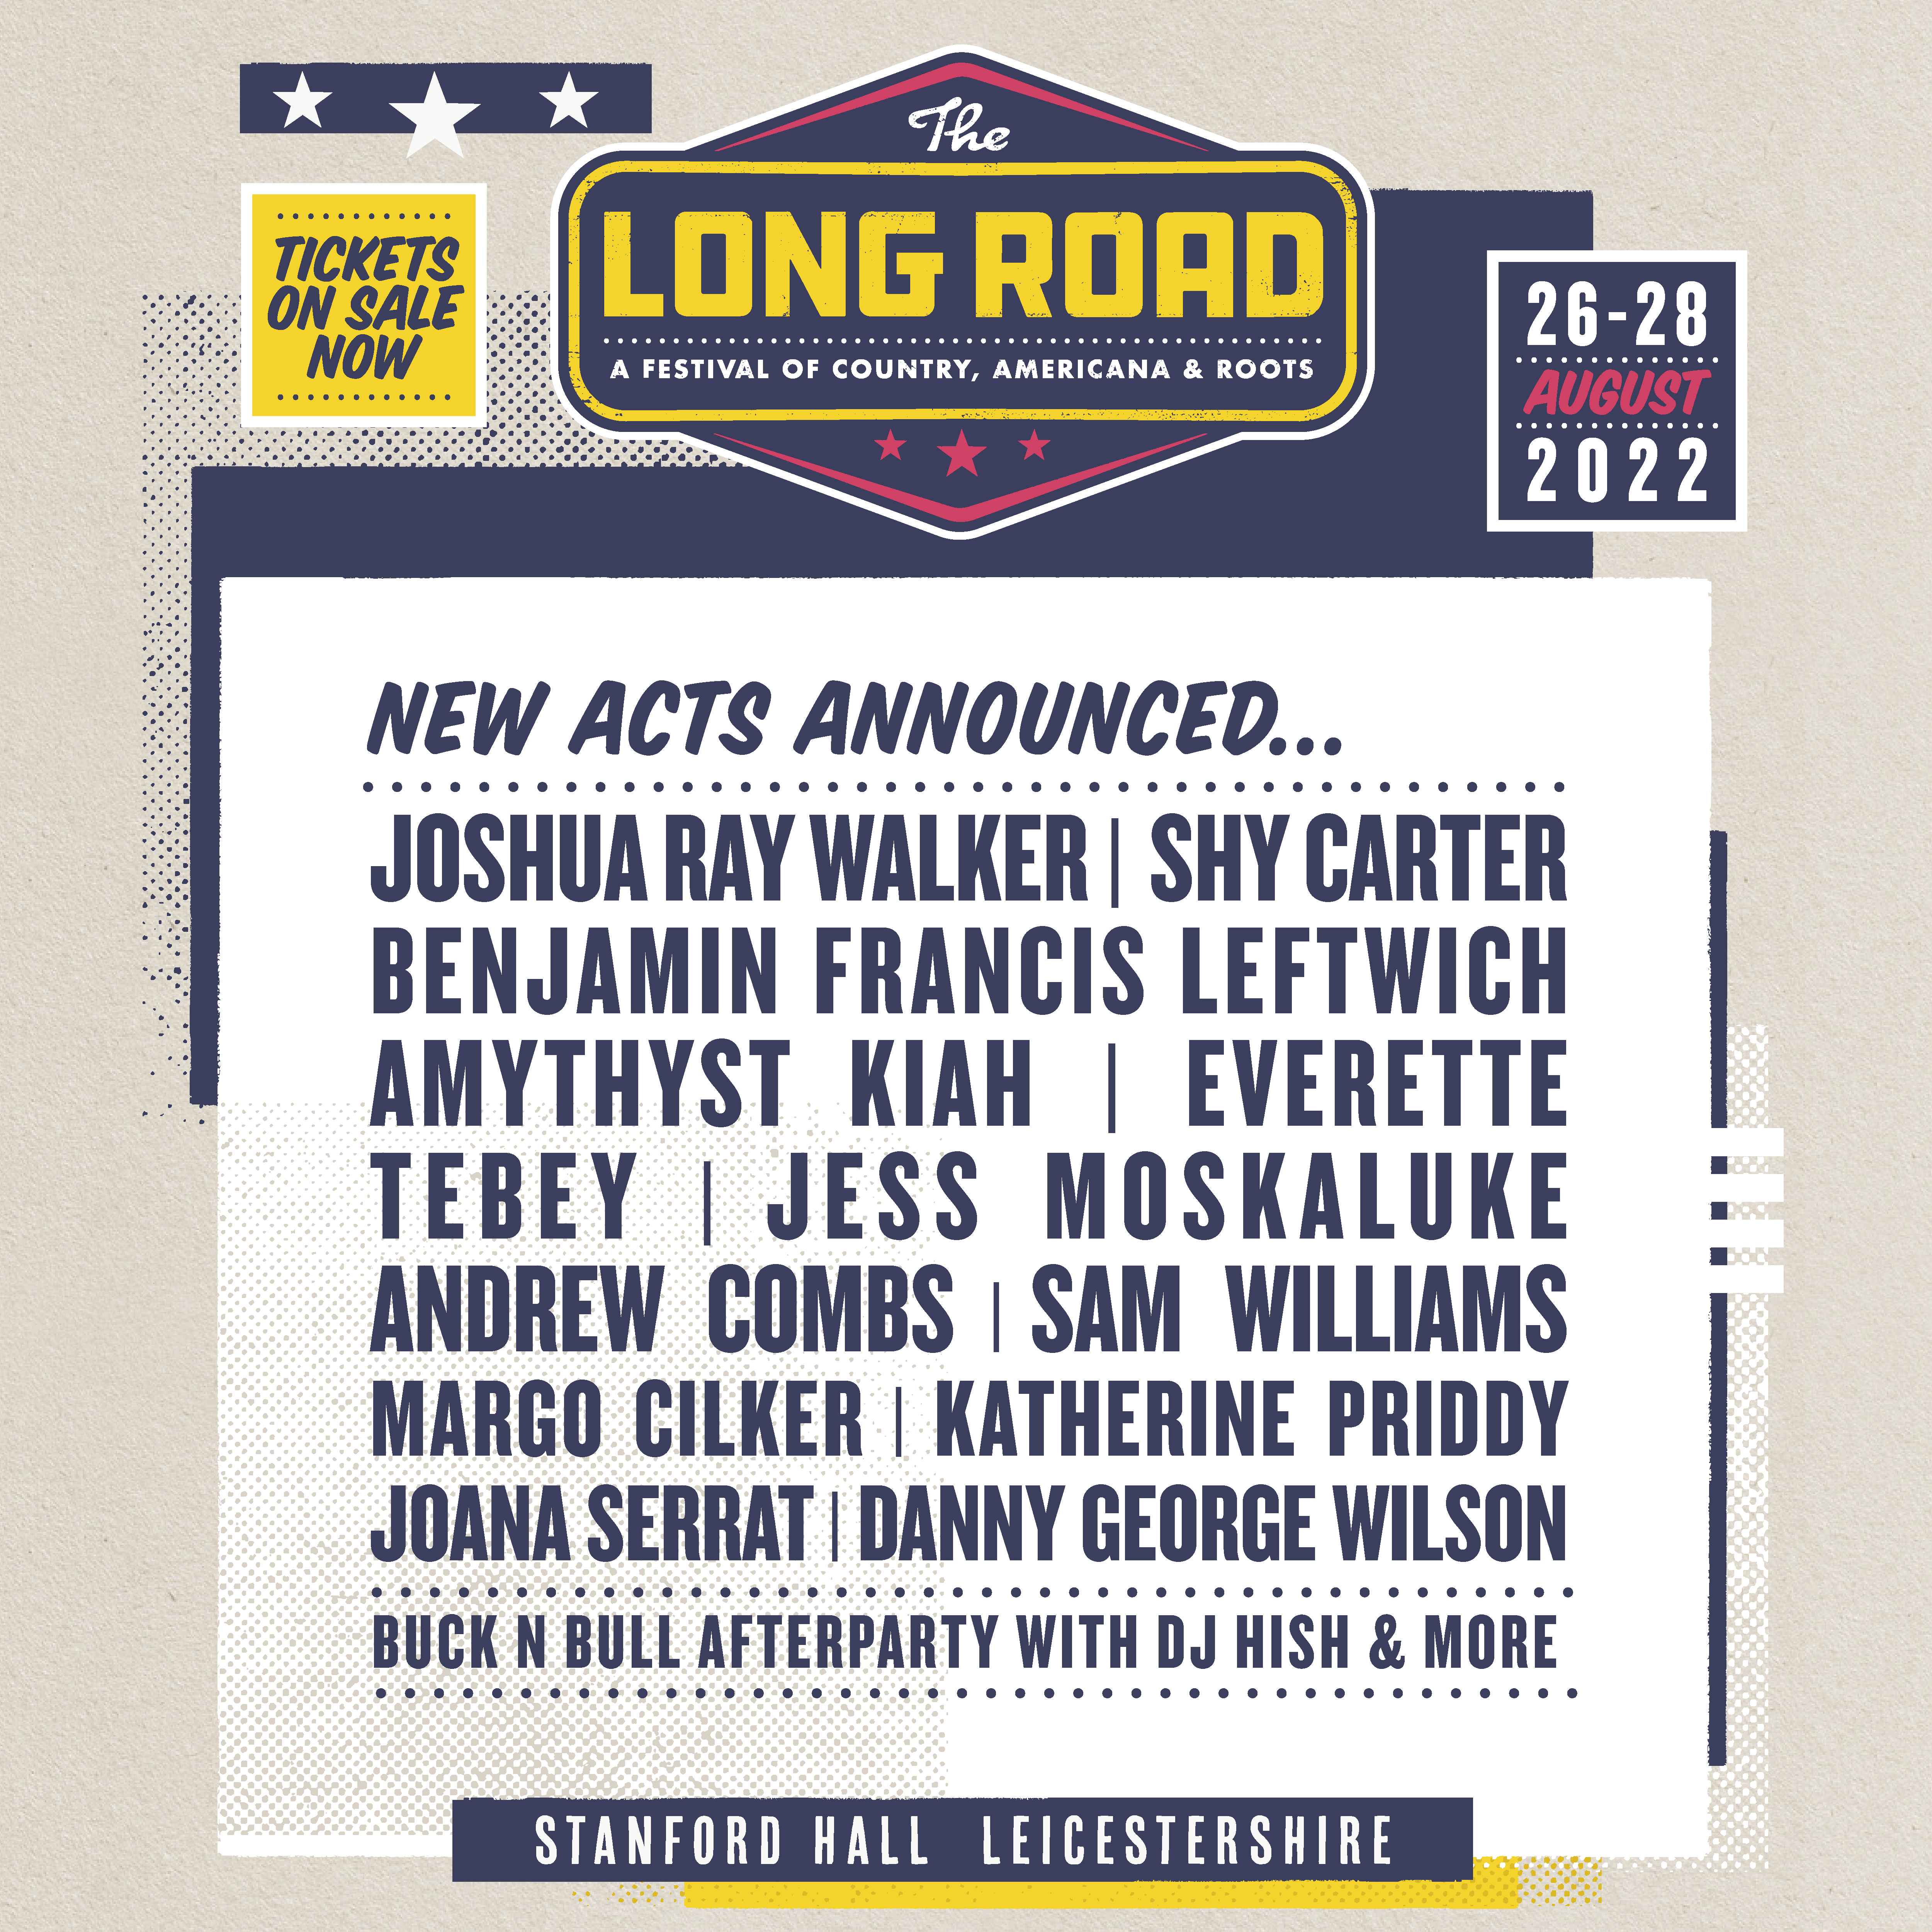 The Long Road Festival Announces New 2022 LineUp Additions Holler